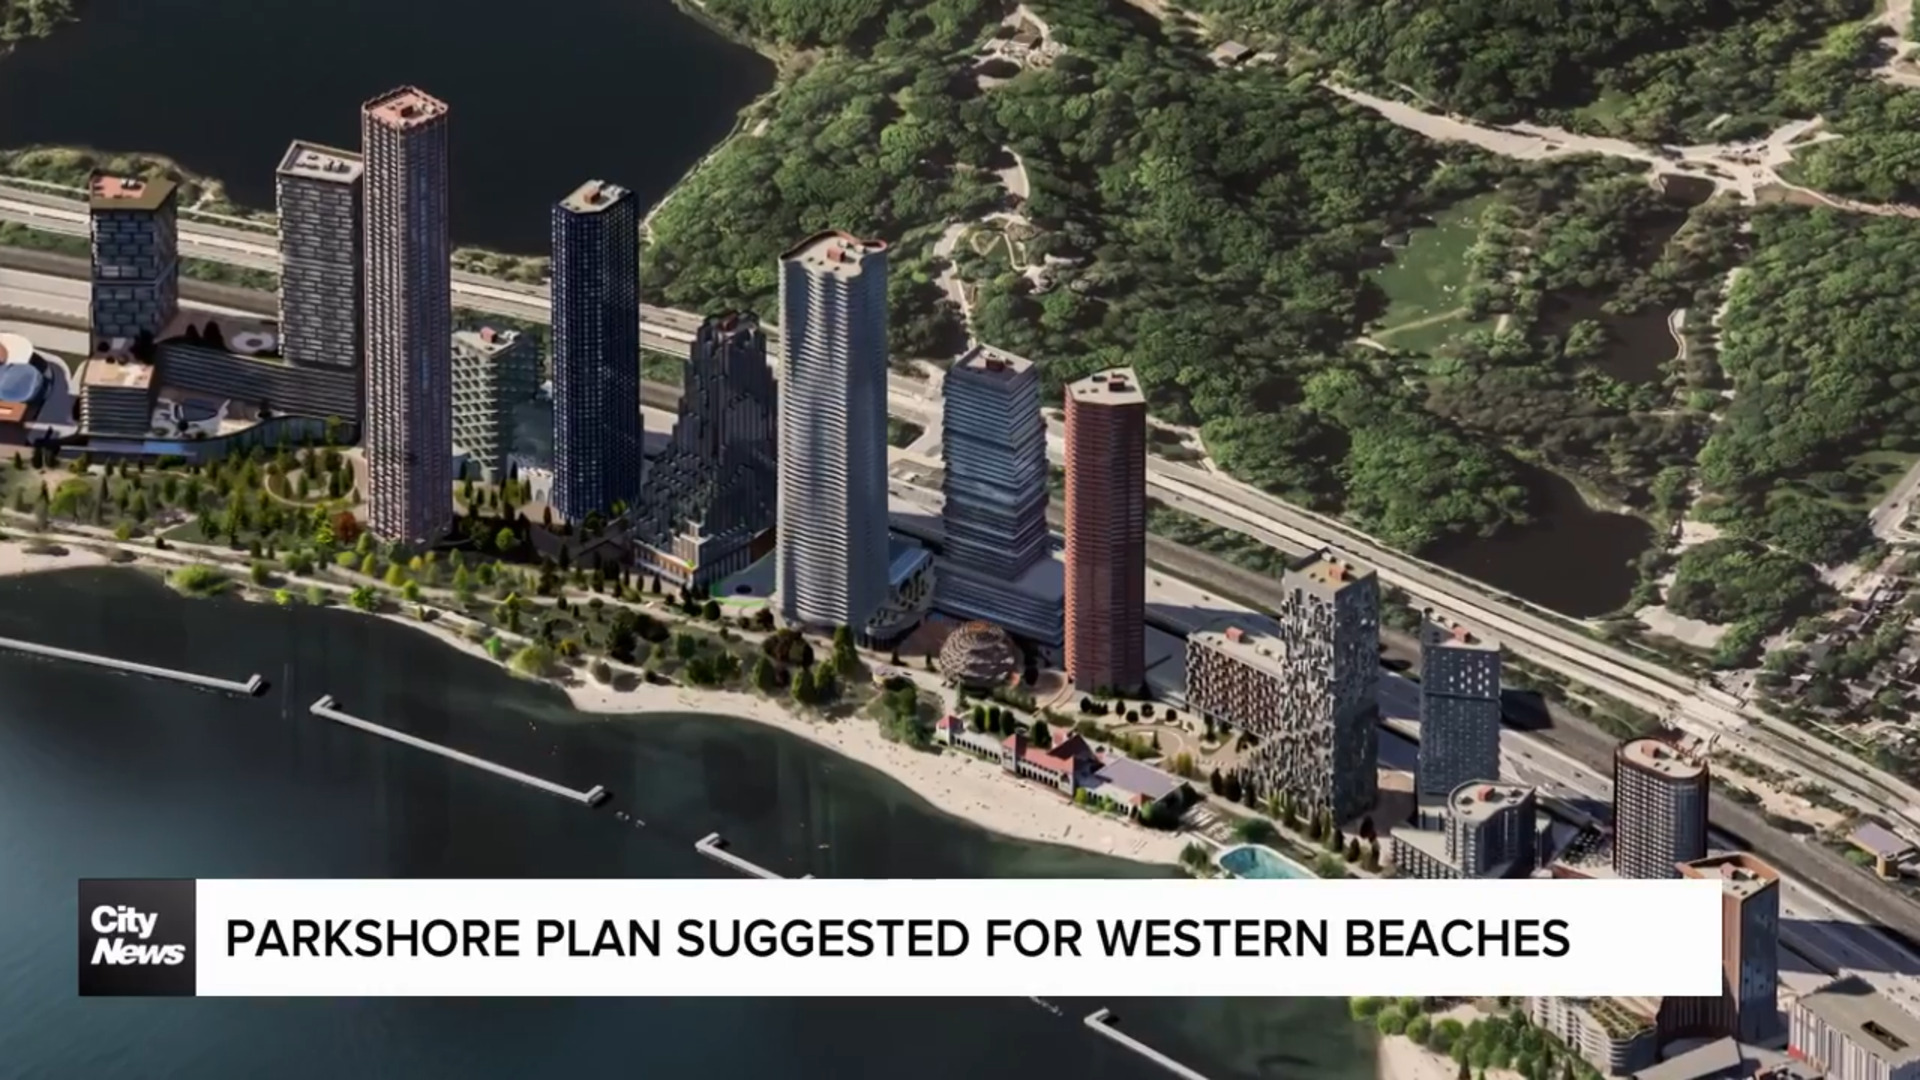 New 'Parkshore' community plan for western beaches gets mixed reaction